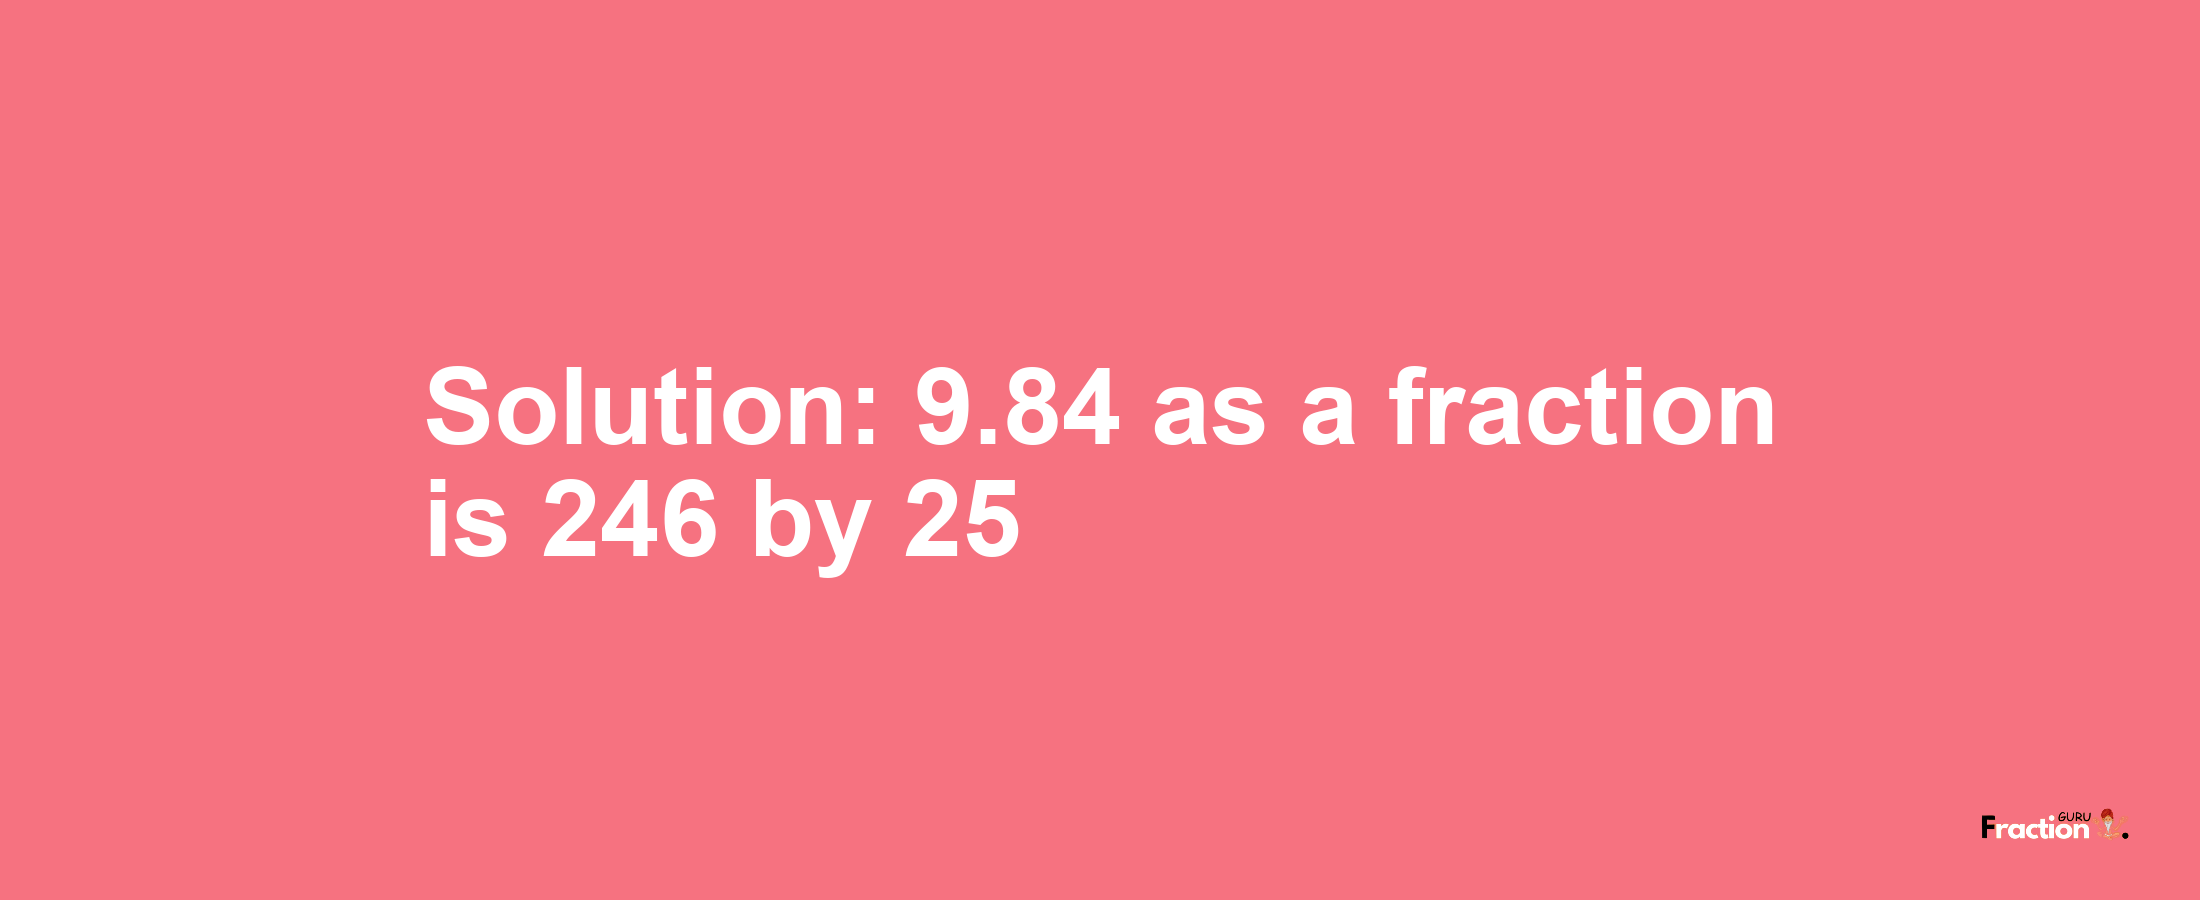 Solution:9.84 as a fraction is 246/25